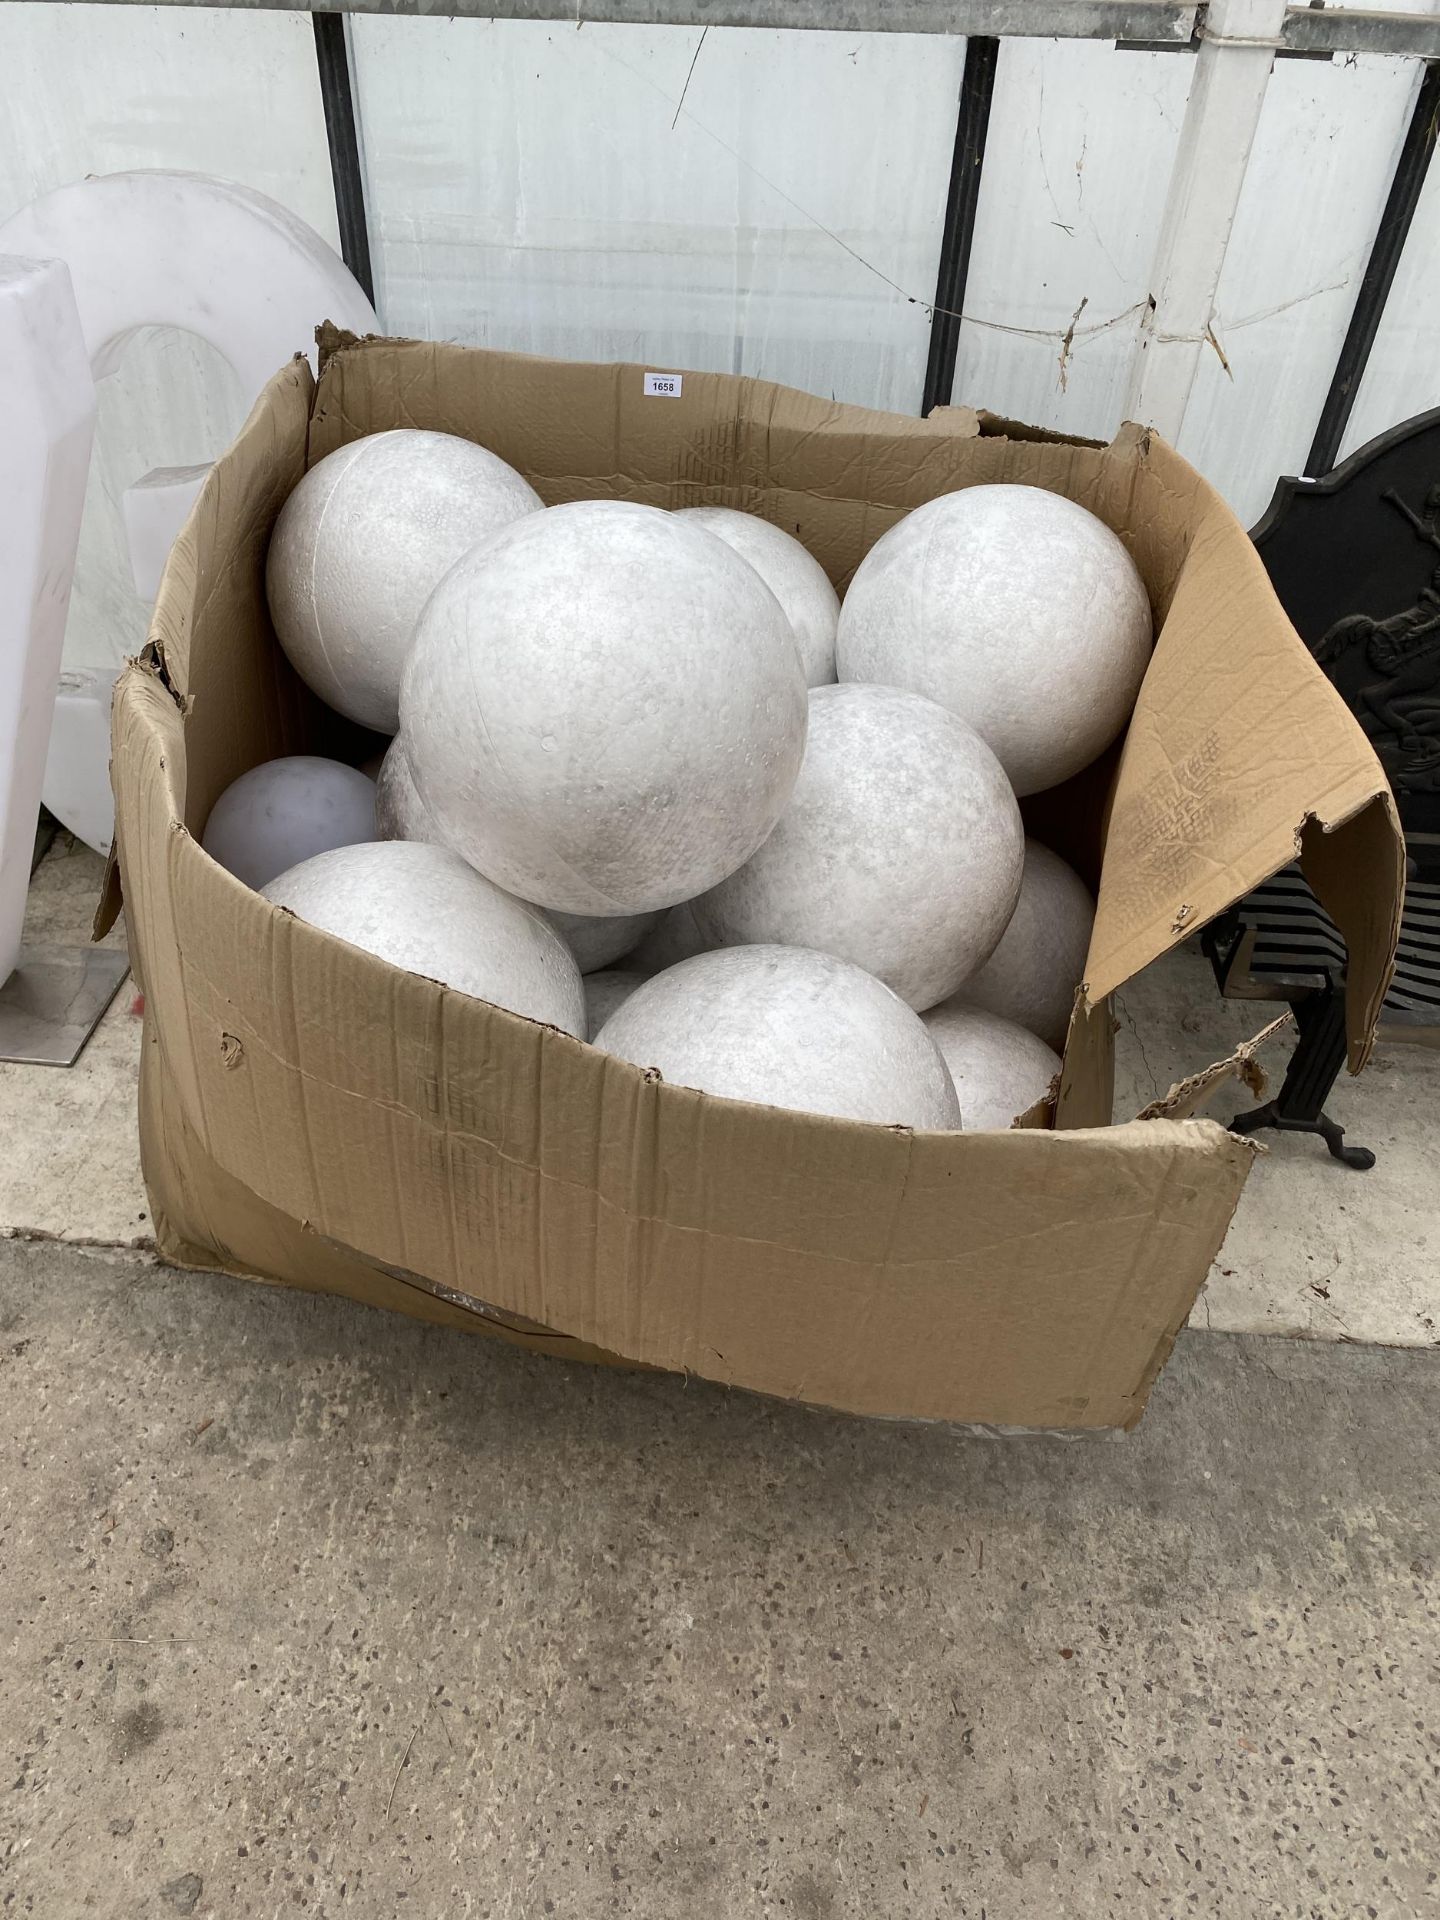 A LARGE QUANTITY OF SPHERICAL POLYSTYRENE FLORISTRY BALLS